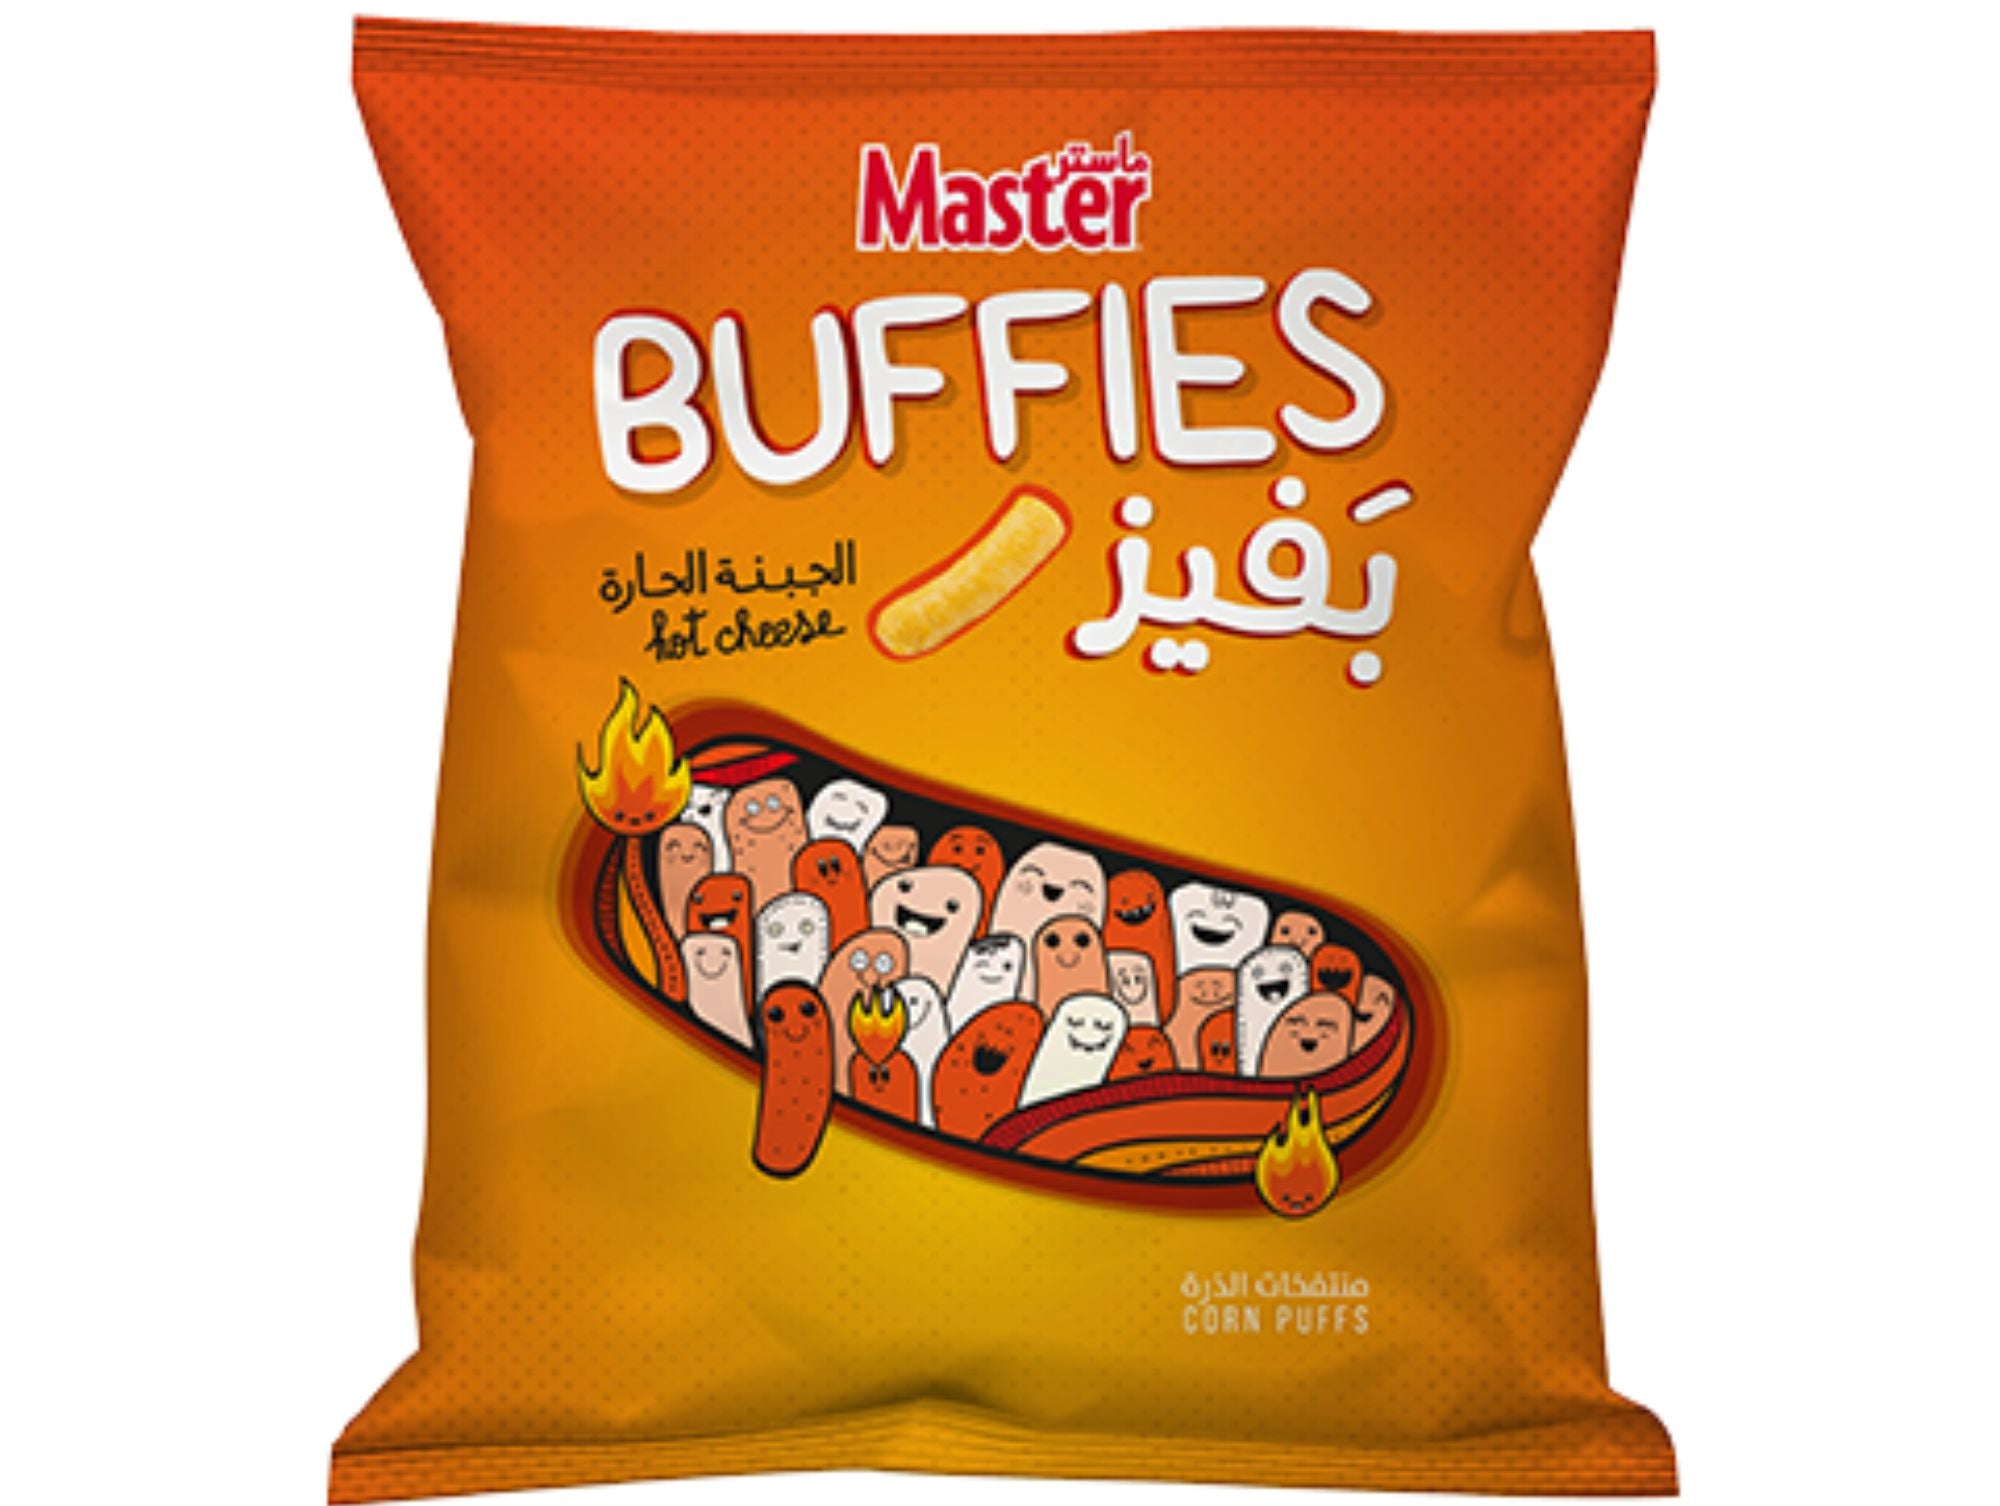 Chips buffies au fromage piquante 60G x 12 MASTER